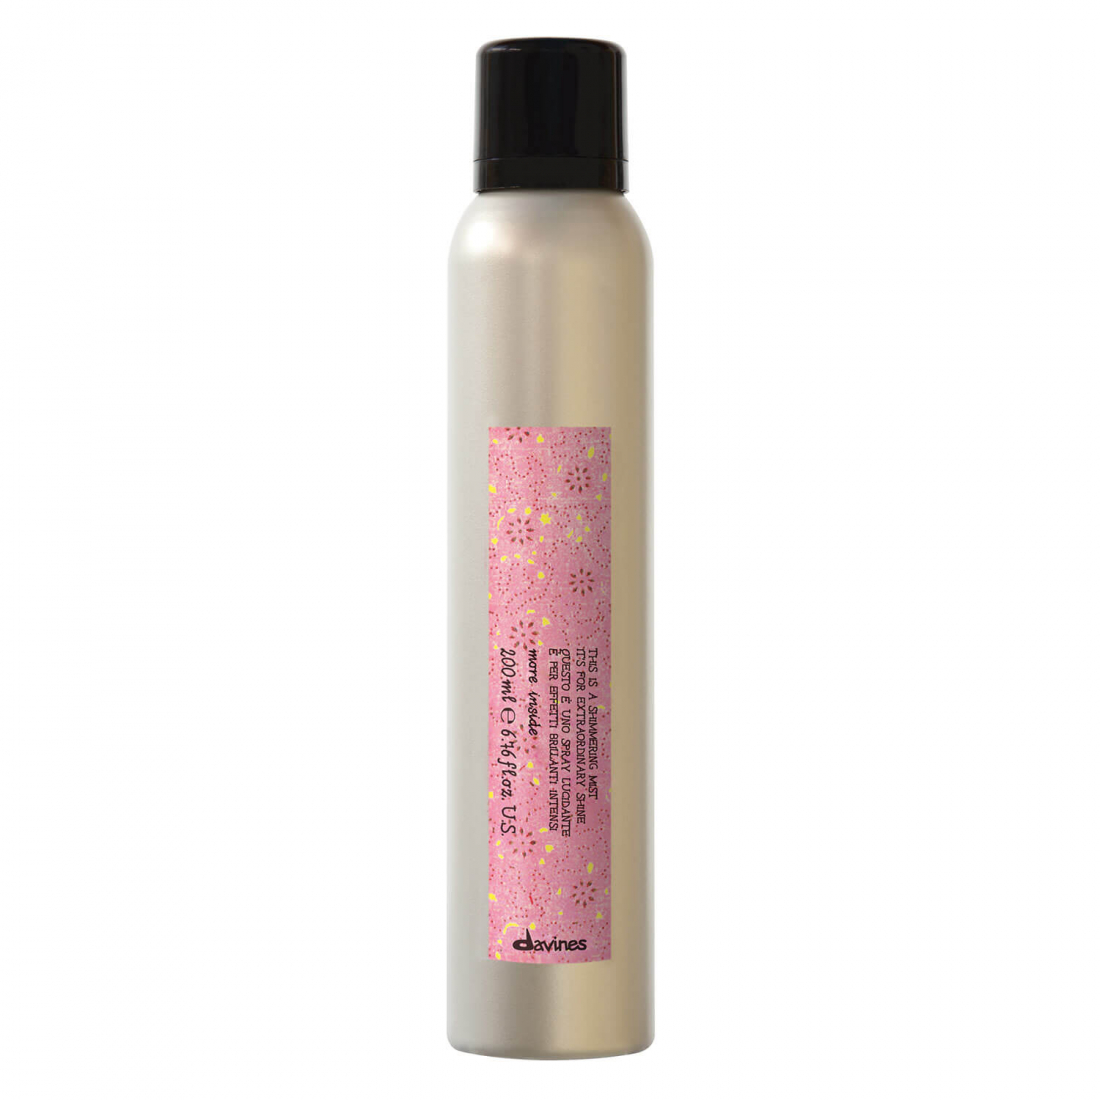 Laque 'More Inside - This is a Shimmering Mist Shimmer' - 200 ml